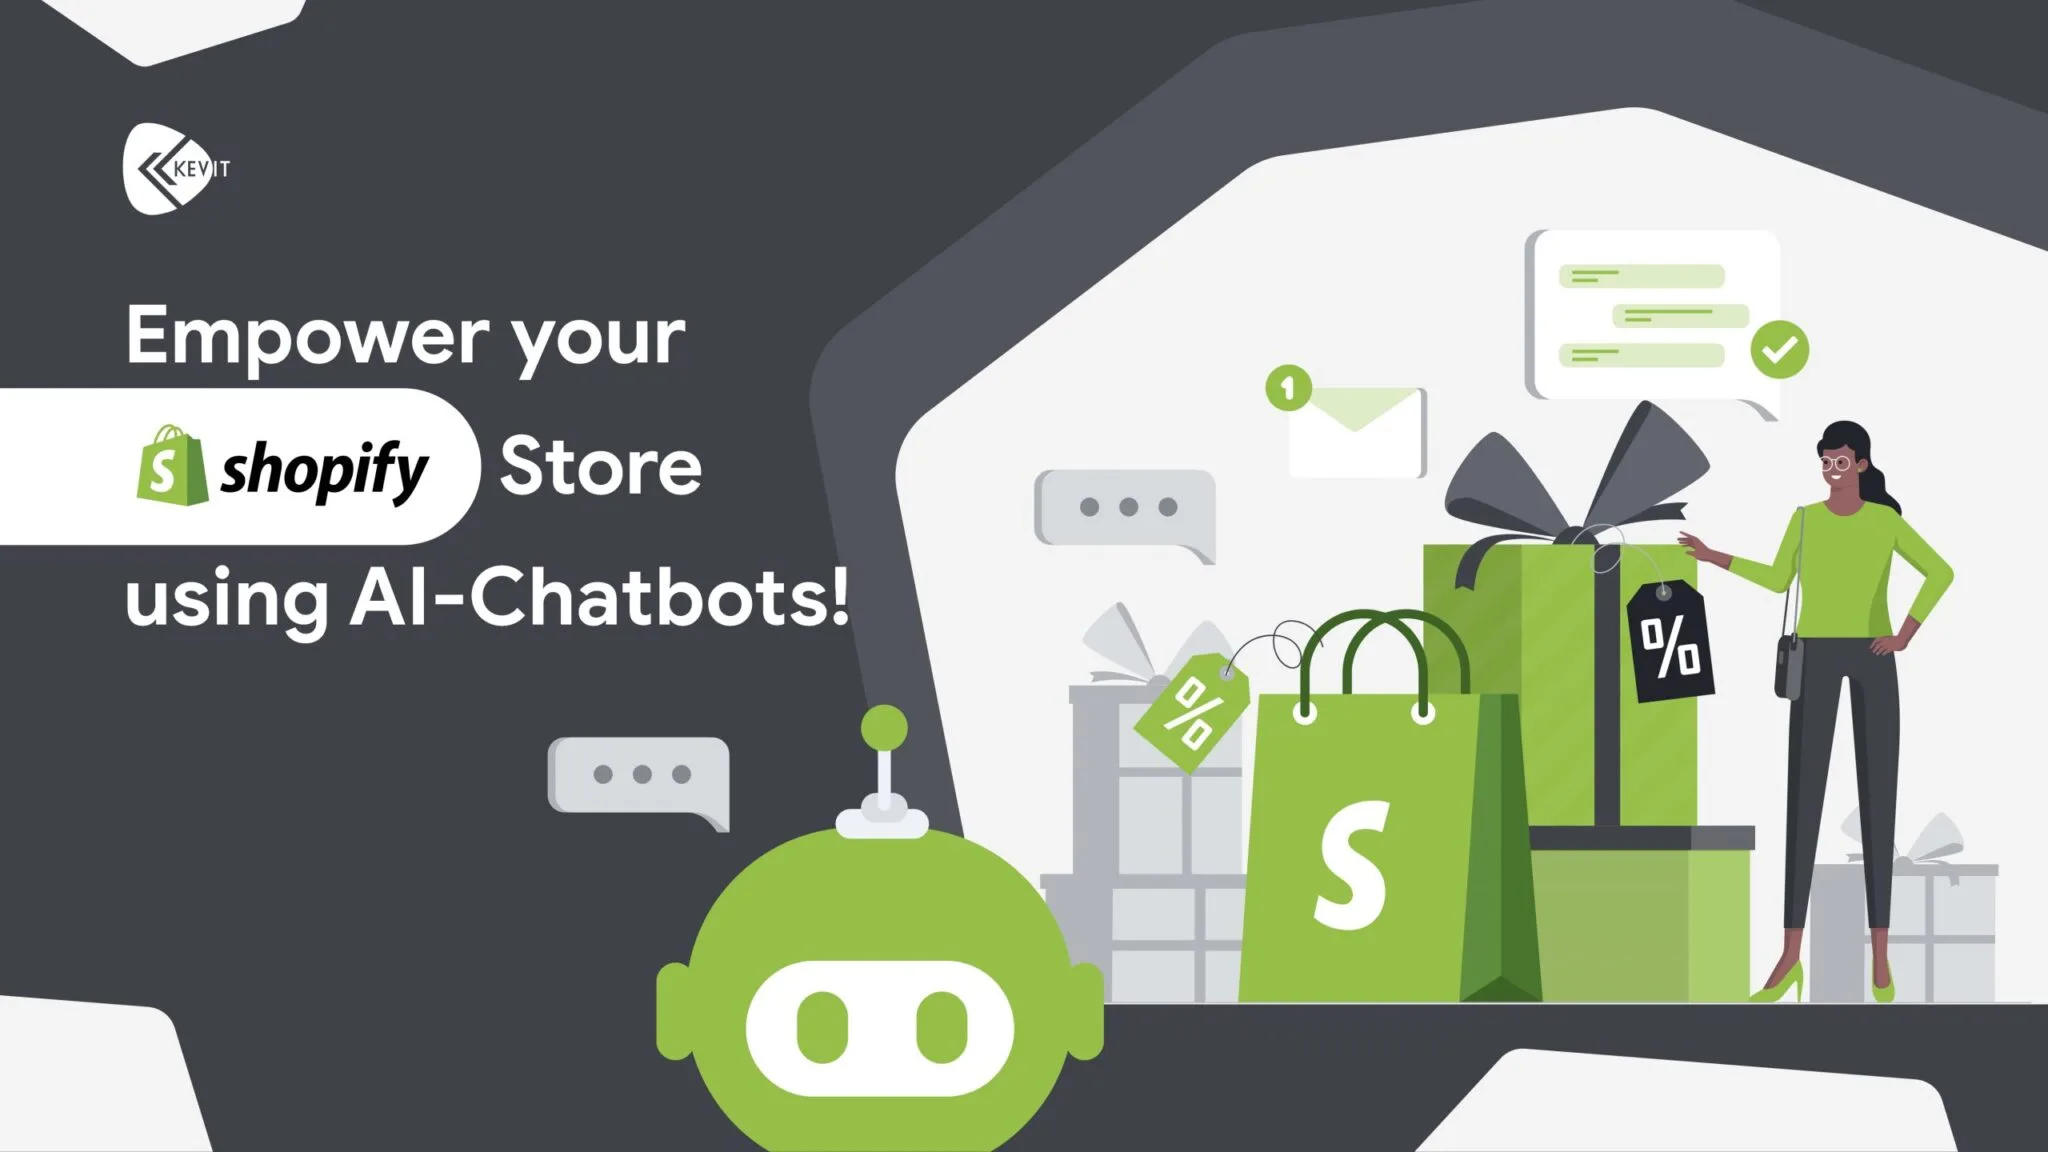 Shopify store with Chatbot